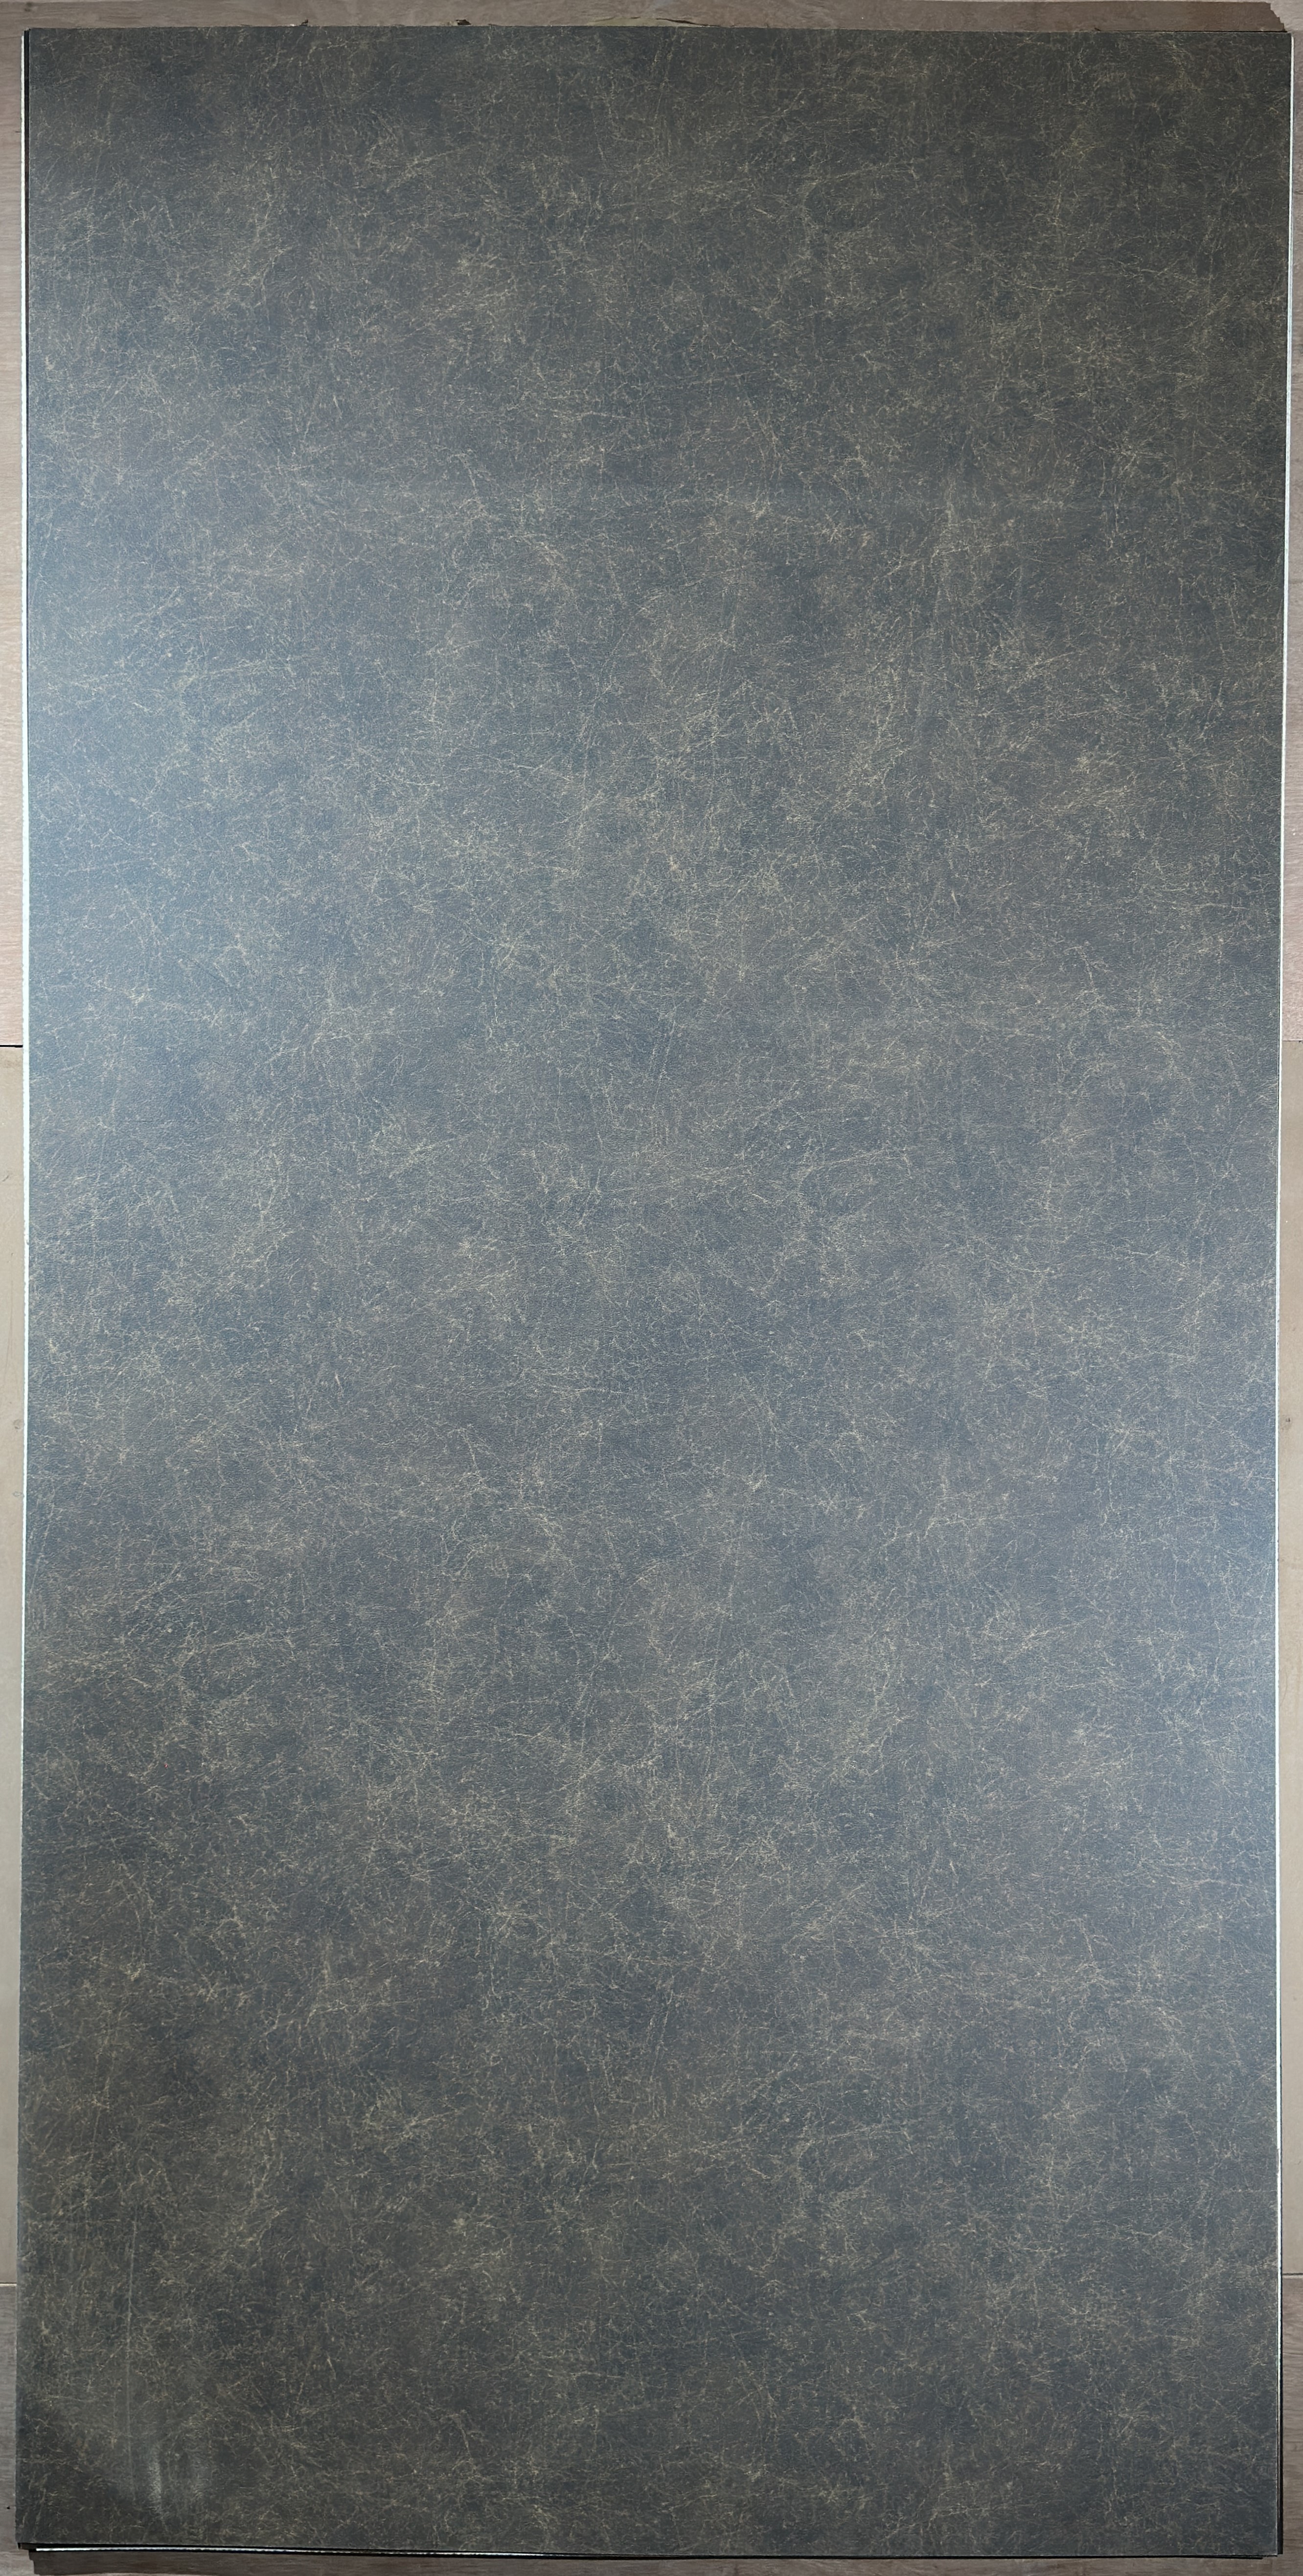 86064 LR Black Decorative Laminate of 1 mm with a Texture finish available for sale at Material Depot in Bangalore